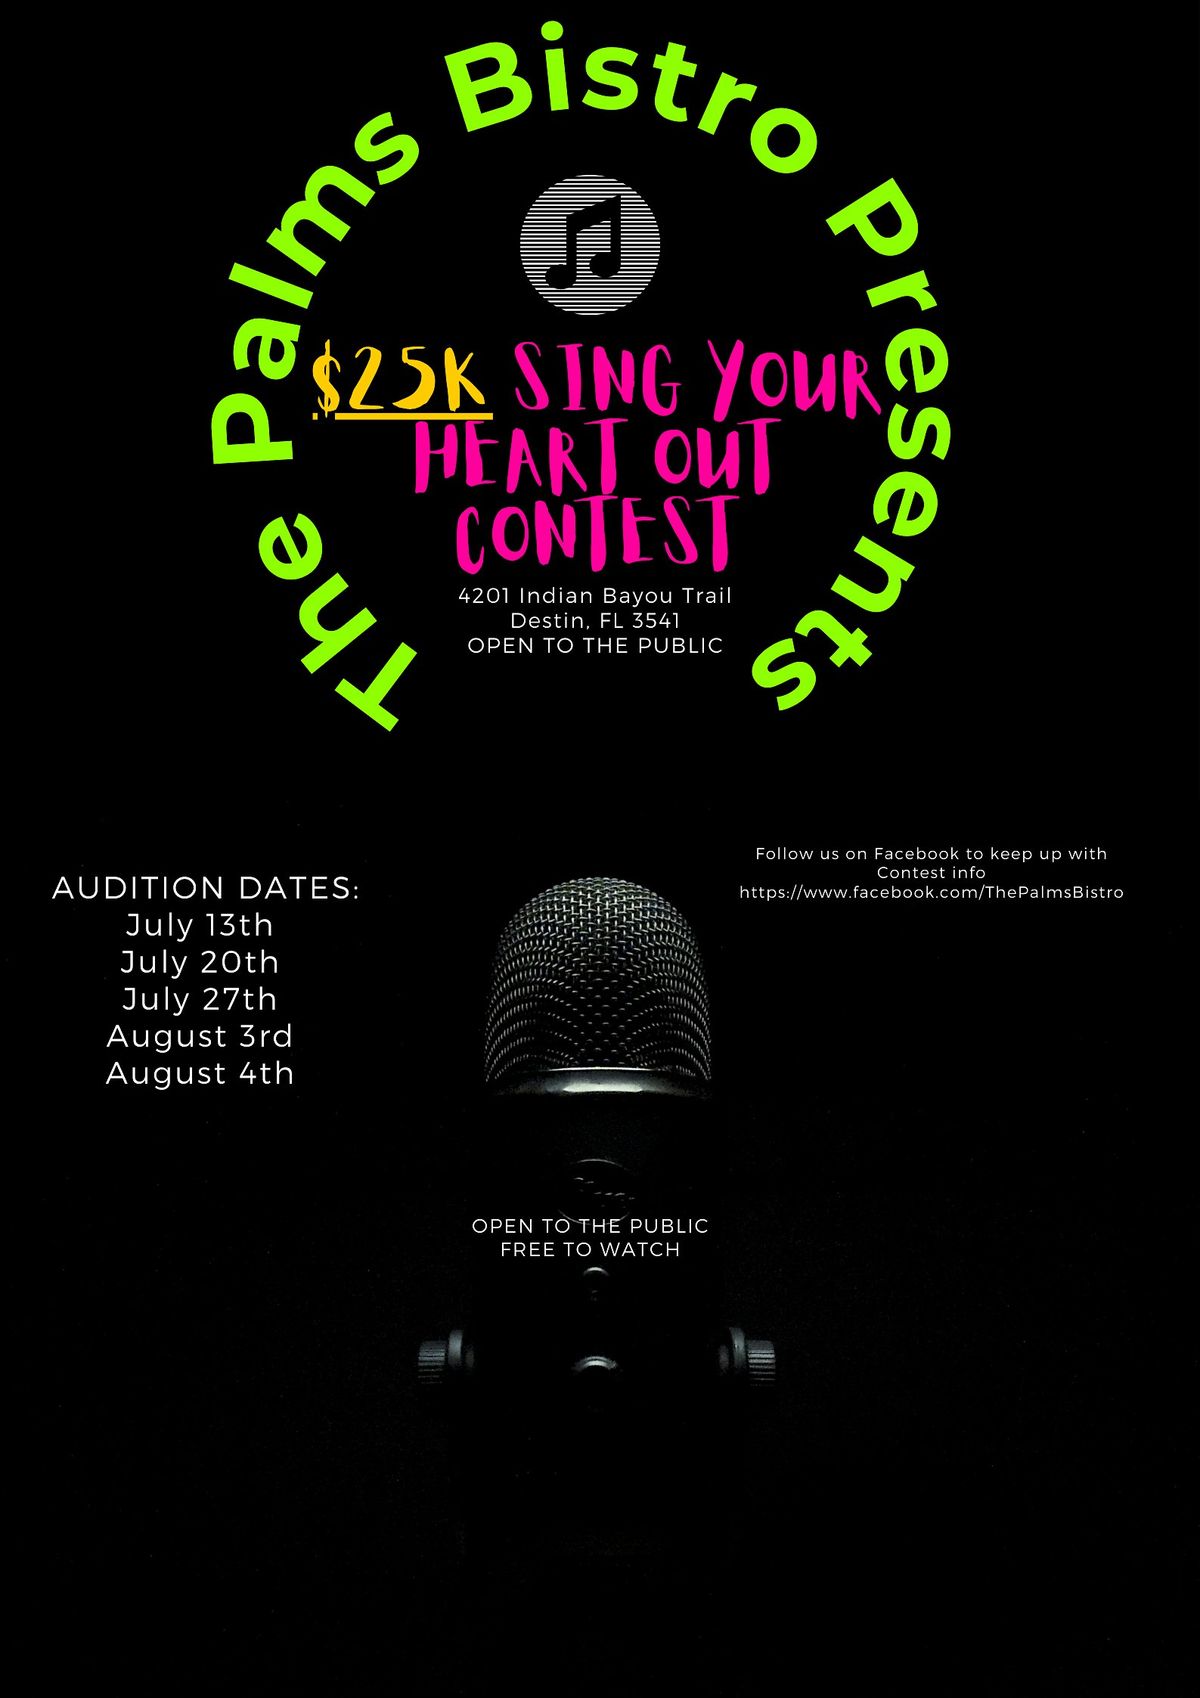 $25K SiNG YOUR HEART OUT CONTEST